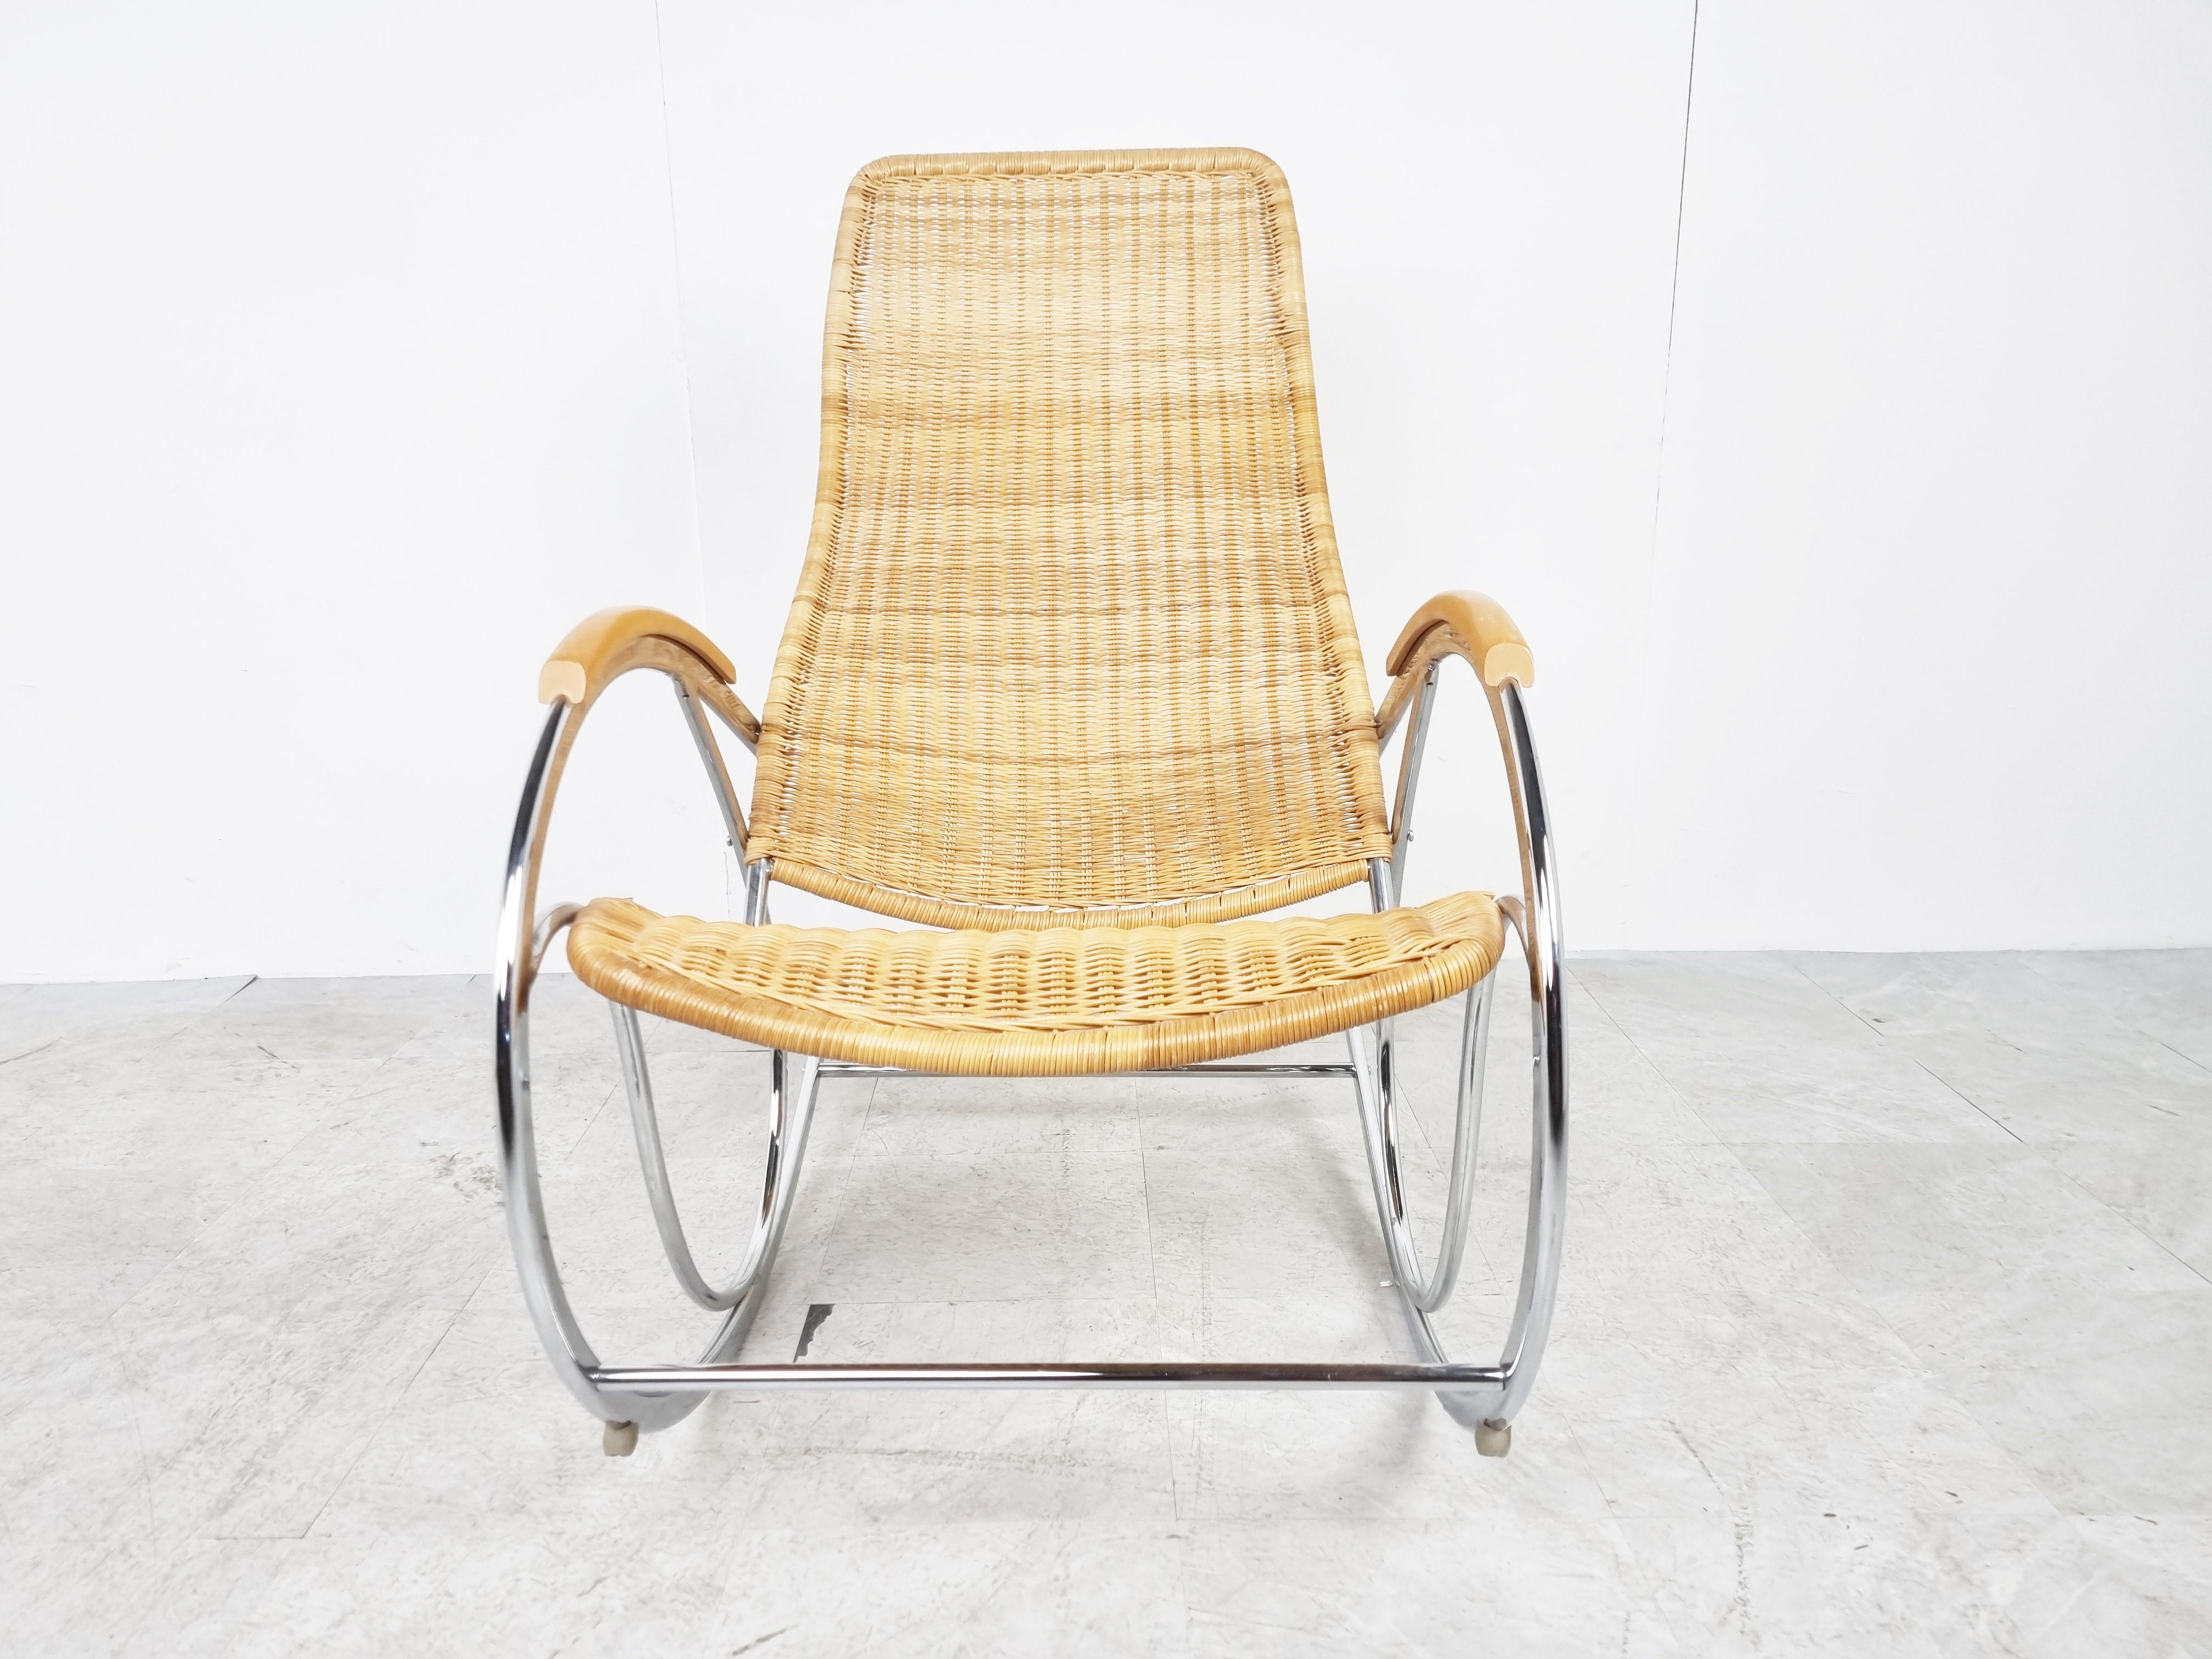 Late 20th Century Vintage Chrome and Wicker Rocking Chair, 1970s